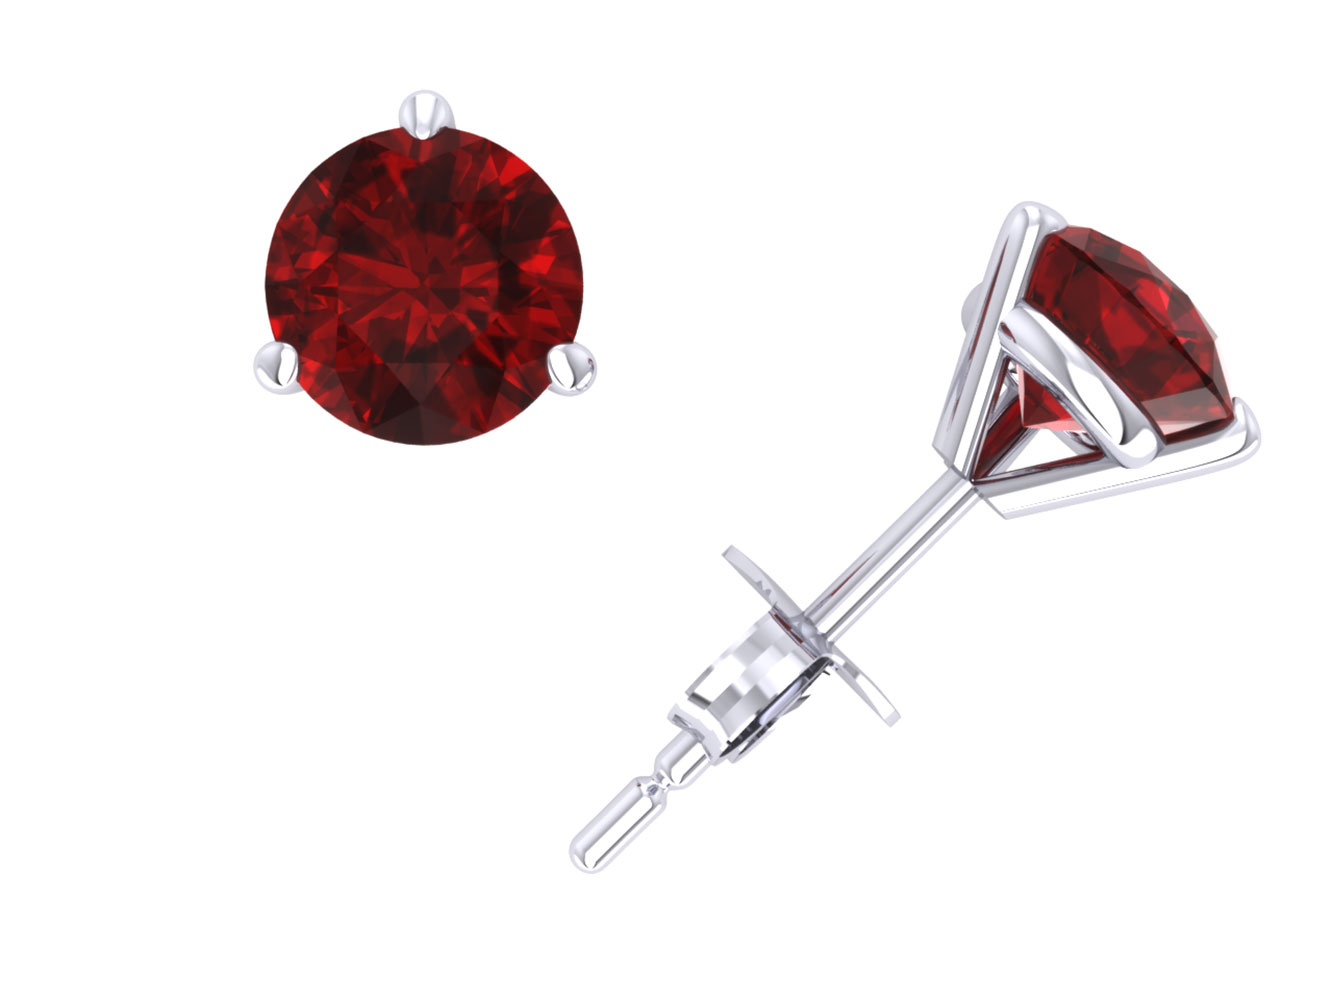 Jewel We Sell Genuine 1.0Ct Round Cut Ruby Martini Stud Earrings 14k White or Yellow Gold Prong Push Back AAA Quality